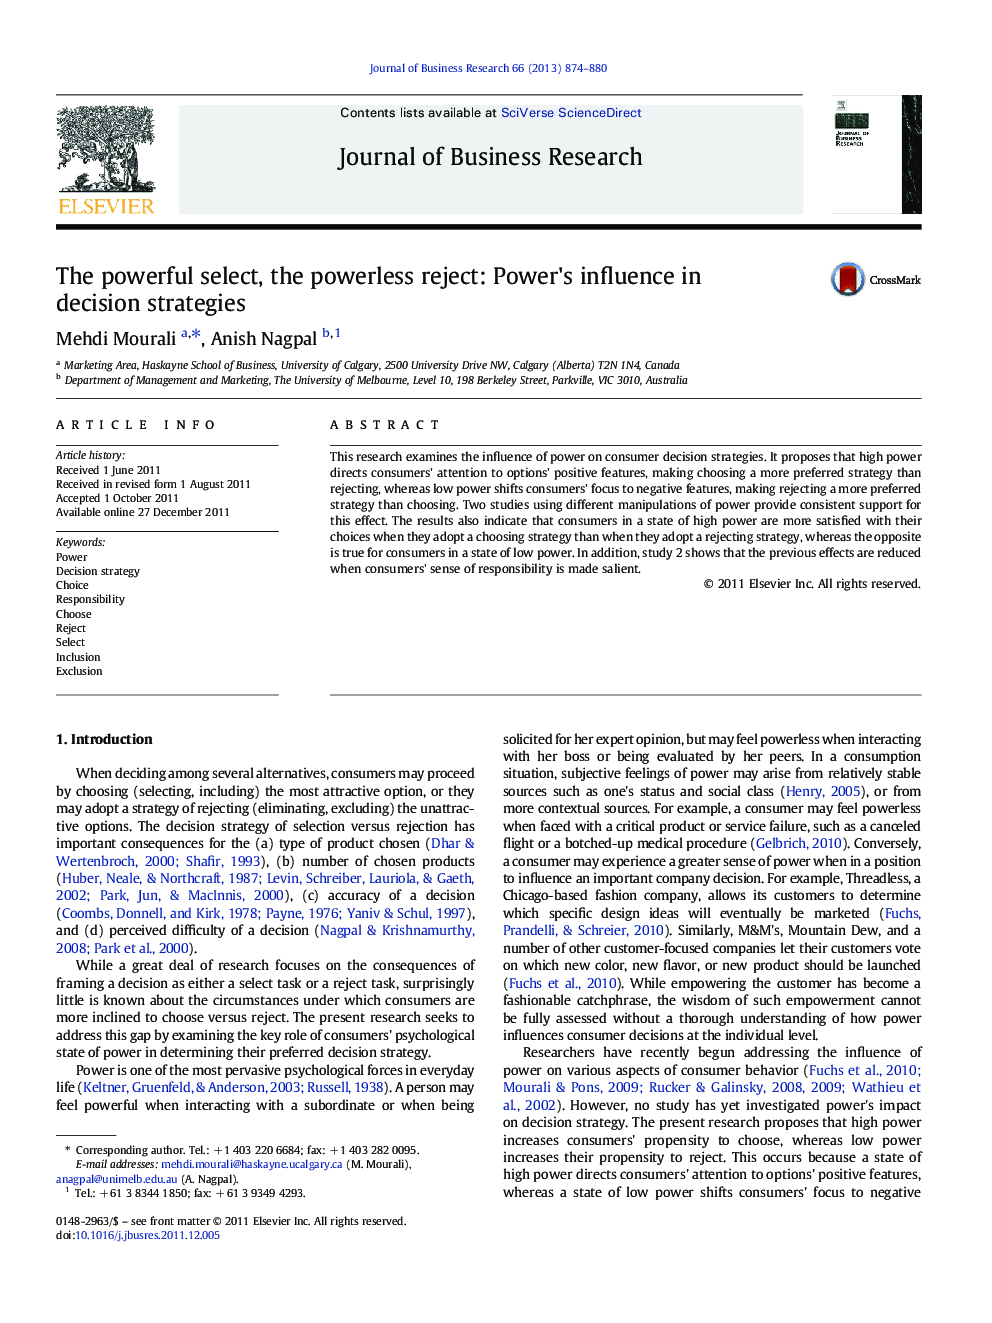 The powerful select, the powerless reject: Power's influence in decision strategies